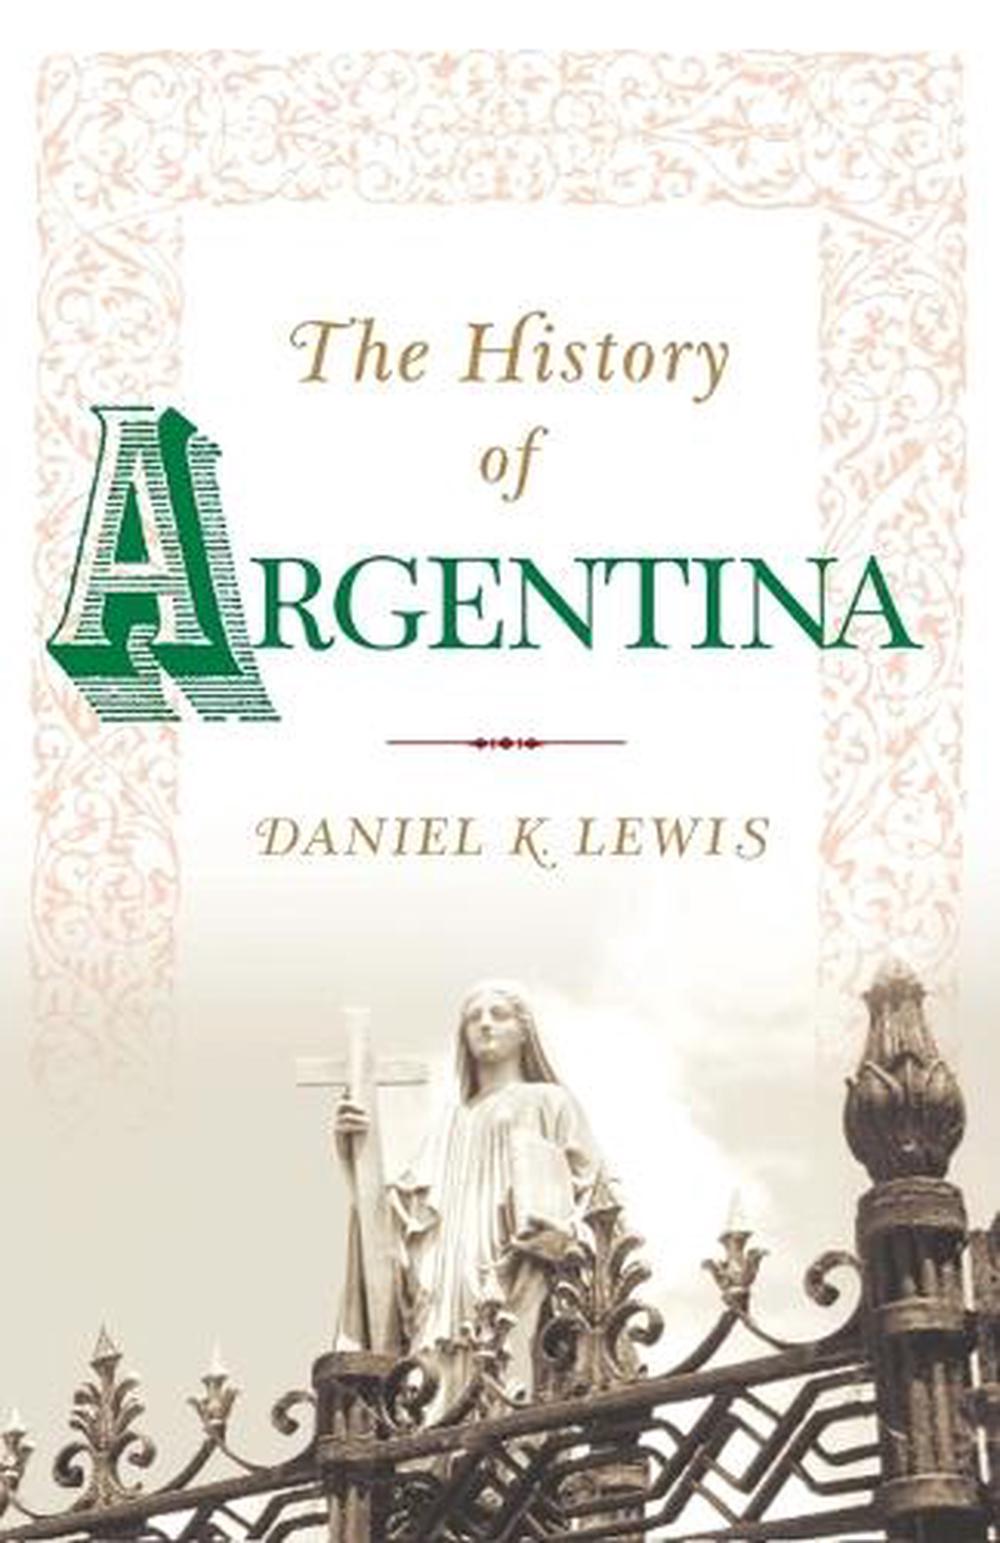 The History of Argentina by Daniel K. Lewis, Paperback, 9781403962546